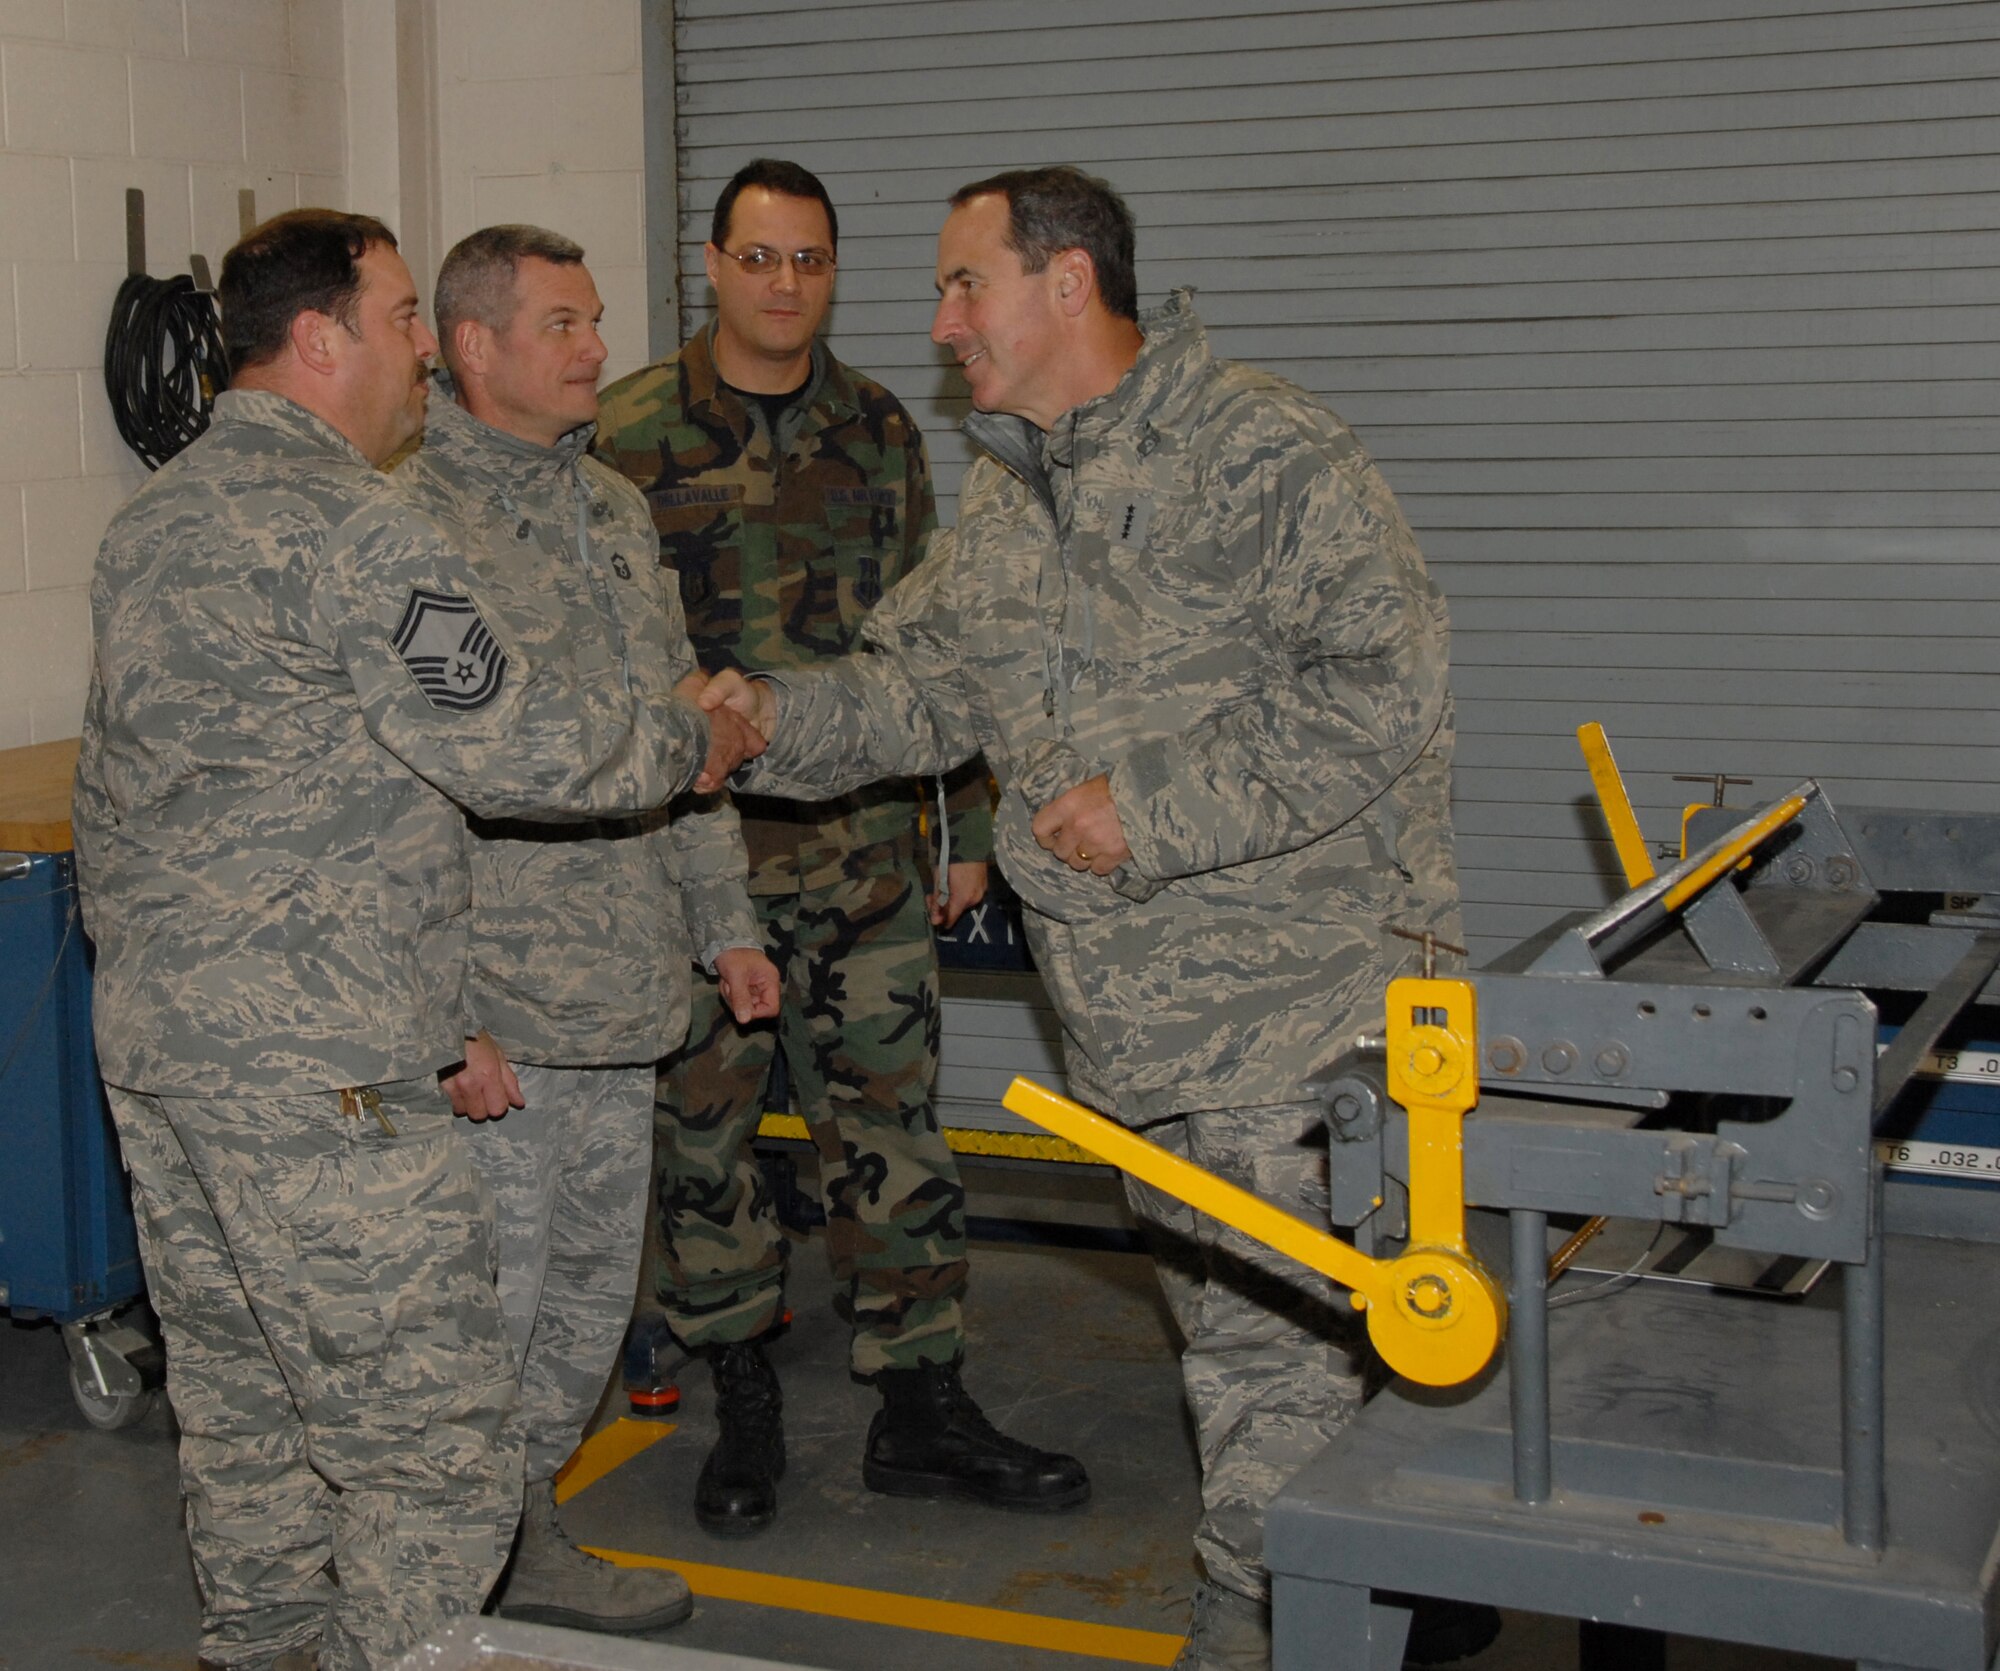 During a recent visit to the Niagara Falls Air Reserve Station, General Raymond Johns, Jr., AMC, Commander, toured a variety of groups and squadrons. This tour enabled the general to receive a firsthand feel of the association between the New York Air National Guard's 107th Airlift Wing and the Air Force Reserve's 914th Airlift Wing.  Front to back: The general is greeted by Senior Master Sgt's Steven Buchwald, 107th AW, Stephen Trosterud, 914thth AW and Joe Dellavalle, 914th AW. (U.S. Air Force Photo/Senior Master Sgt. Ray Lloyd)